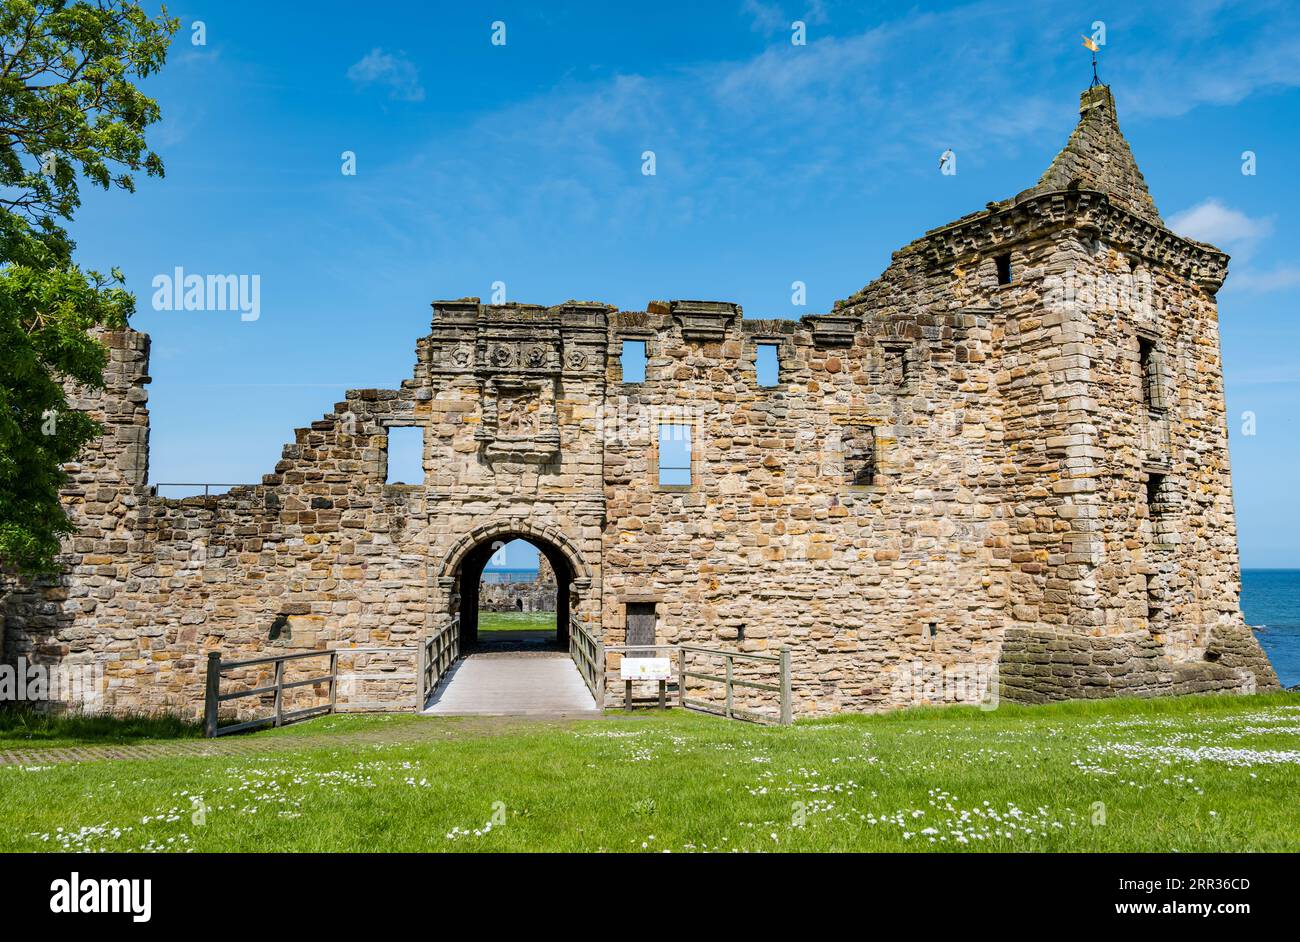 Entrance with drawbridge to the ruins of St Andrews Castle, Fife, Scotland, UK Stock Photo